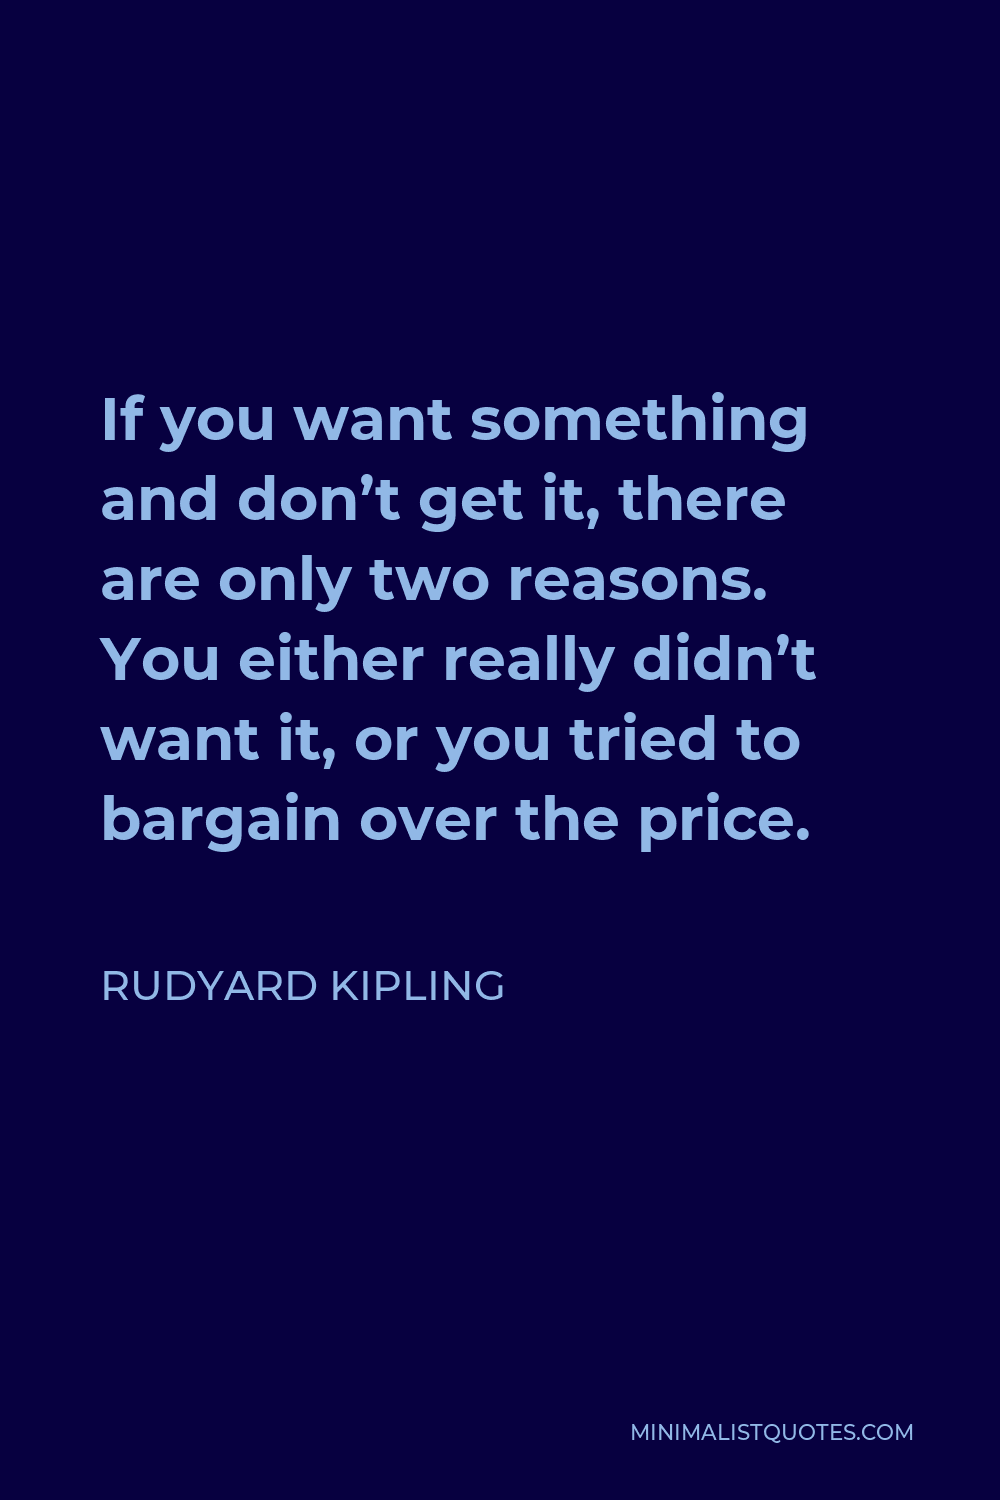 Rudyard Kipling Quote - If you want something and don’t get it, there are only two reasons. You either really didn’t want it, or you tried to bargain over the price.